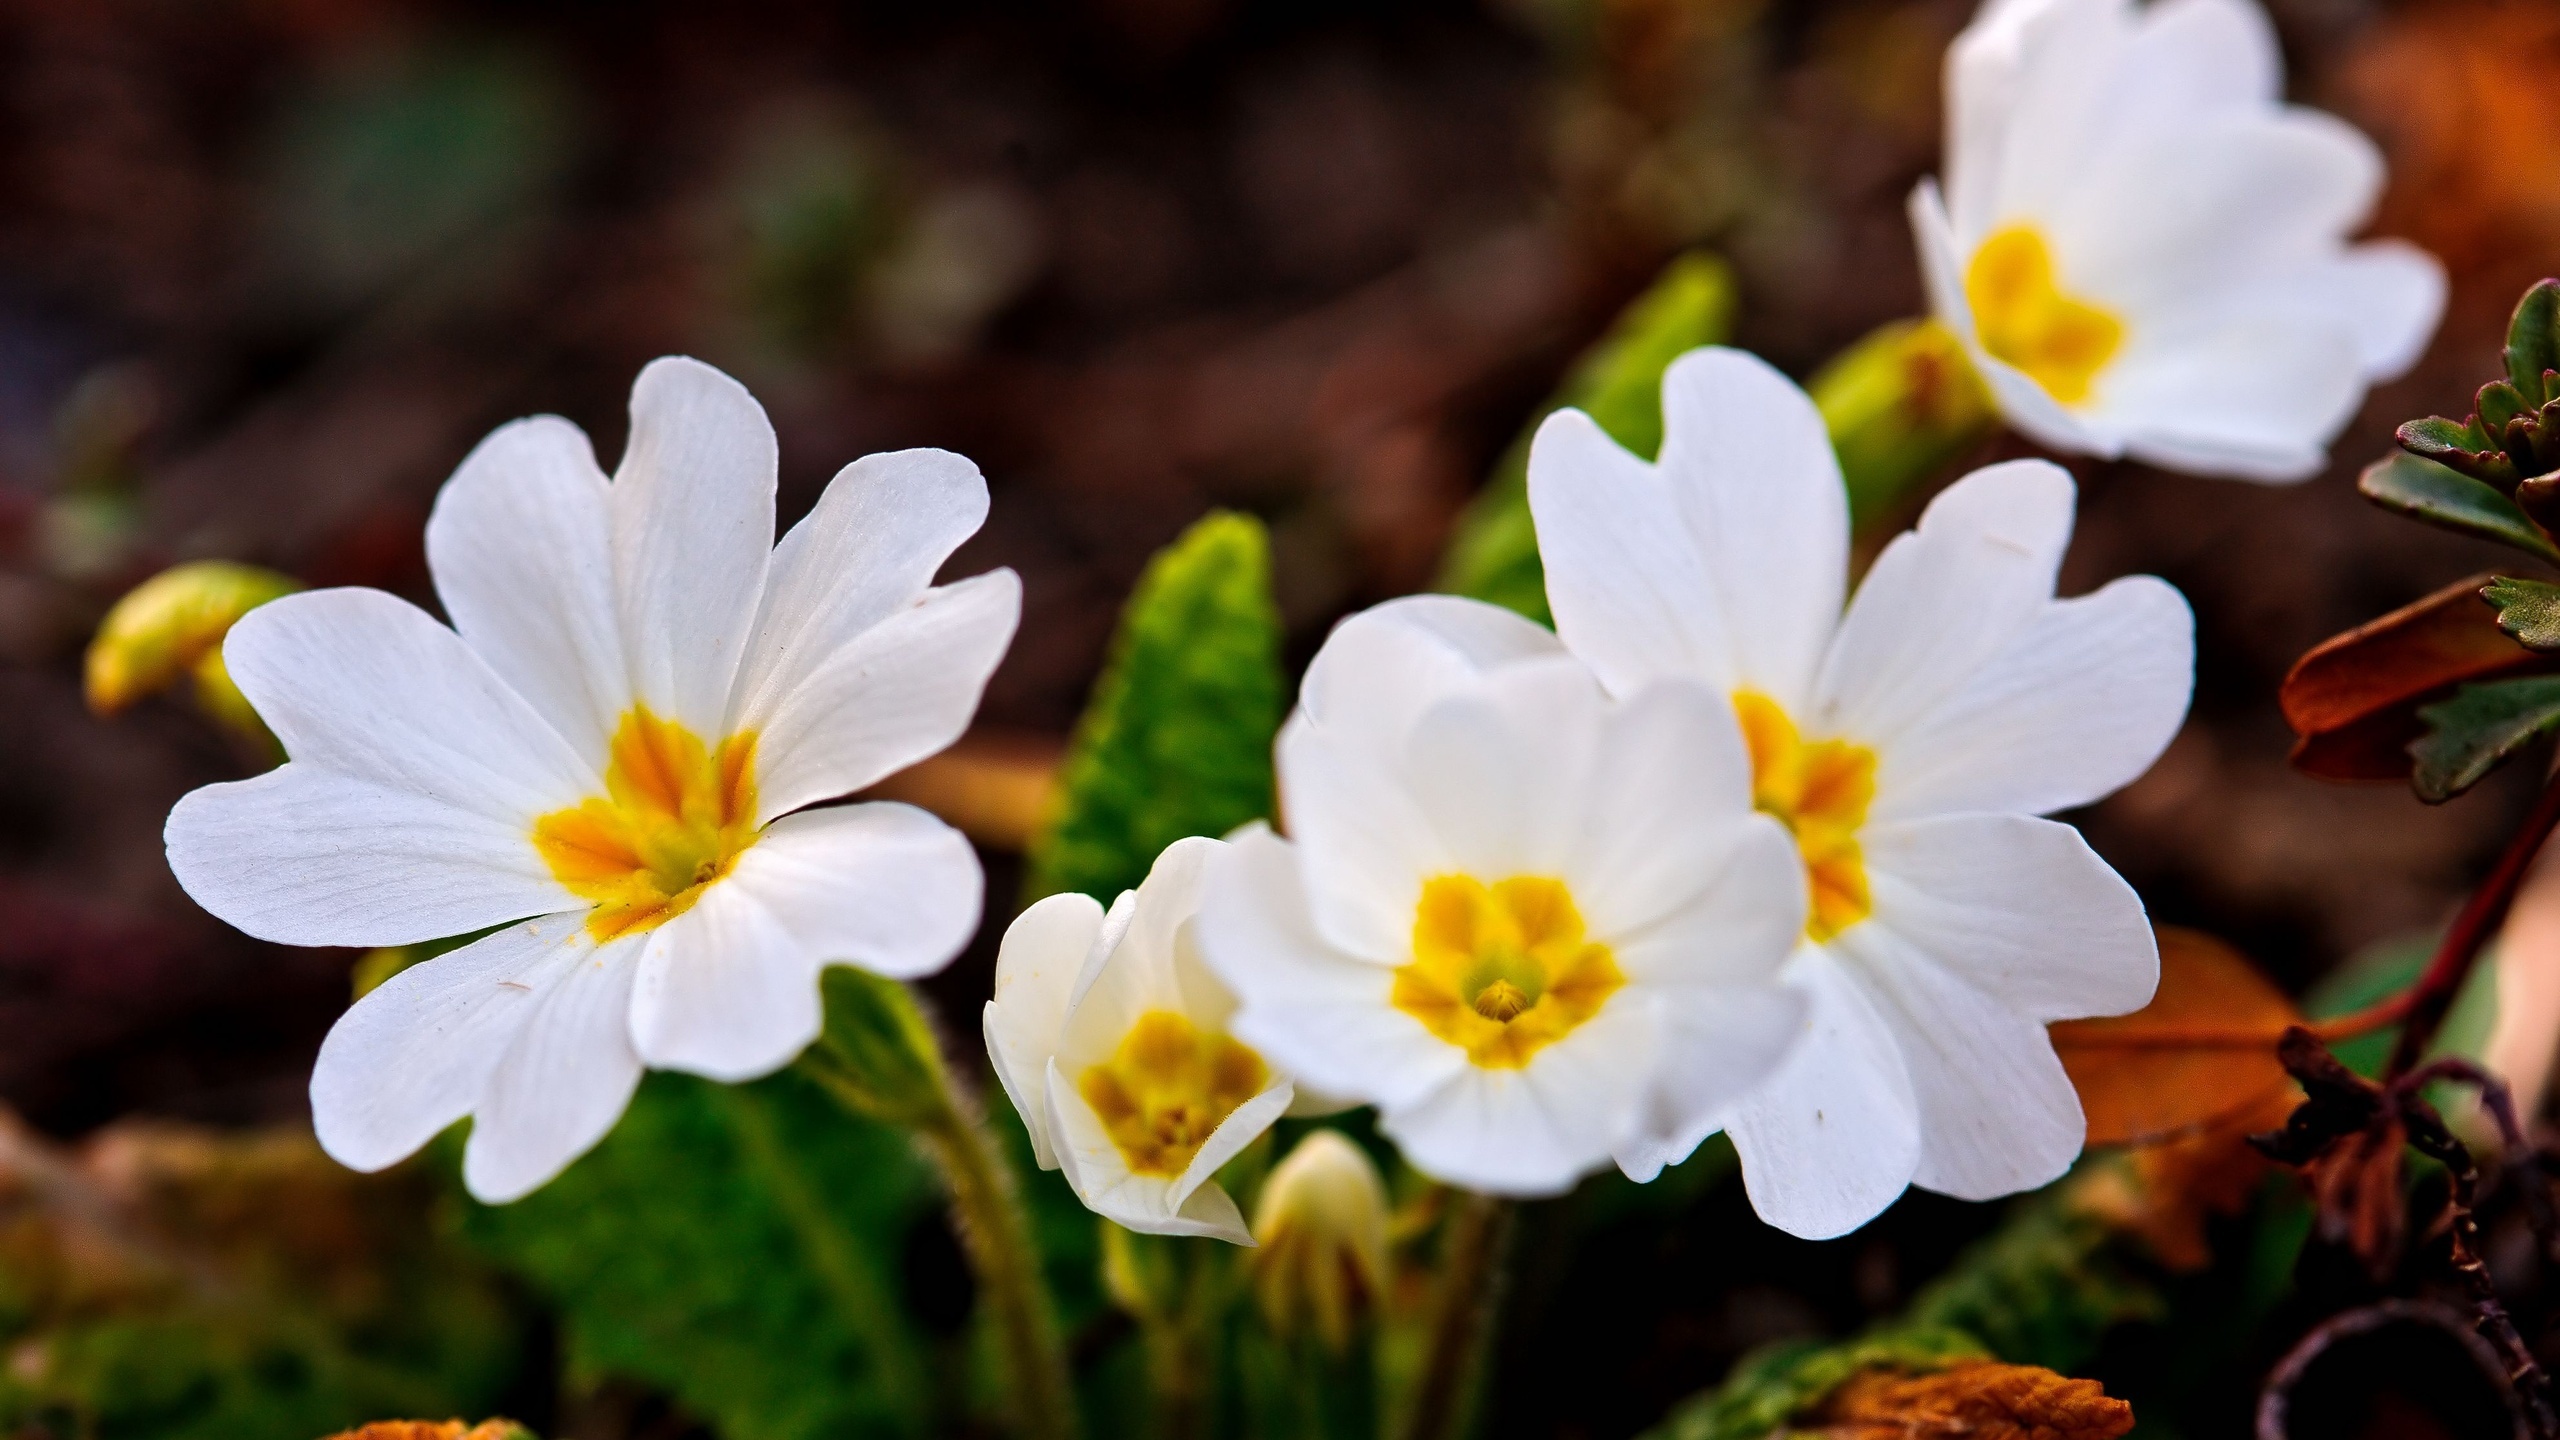 A Few White Spring Flowers Wallpapers - 2560x1440 - 828089